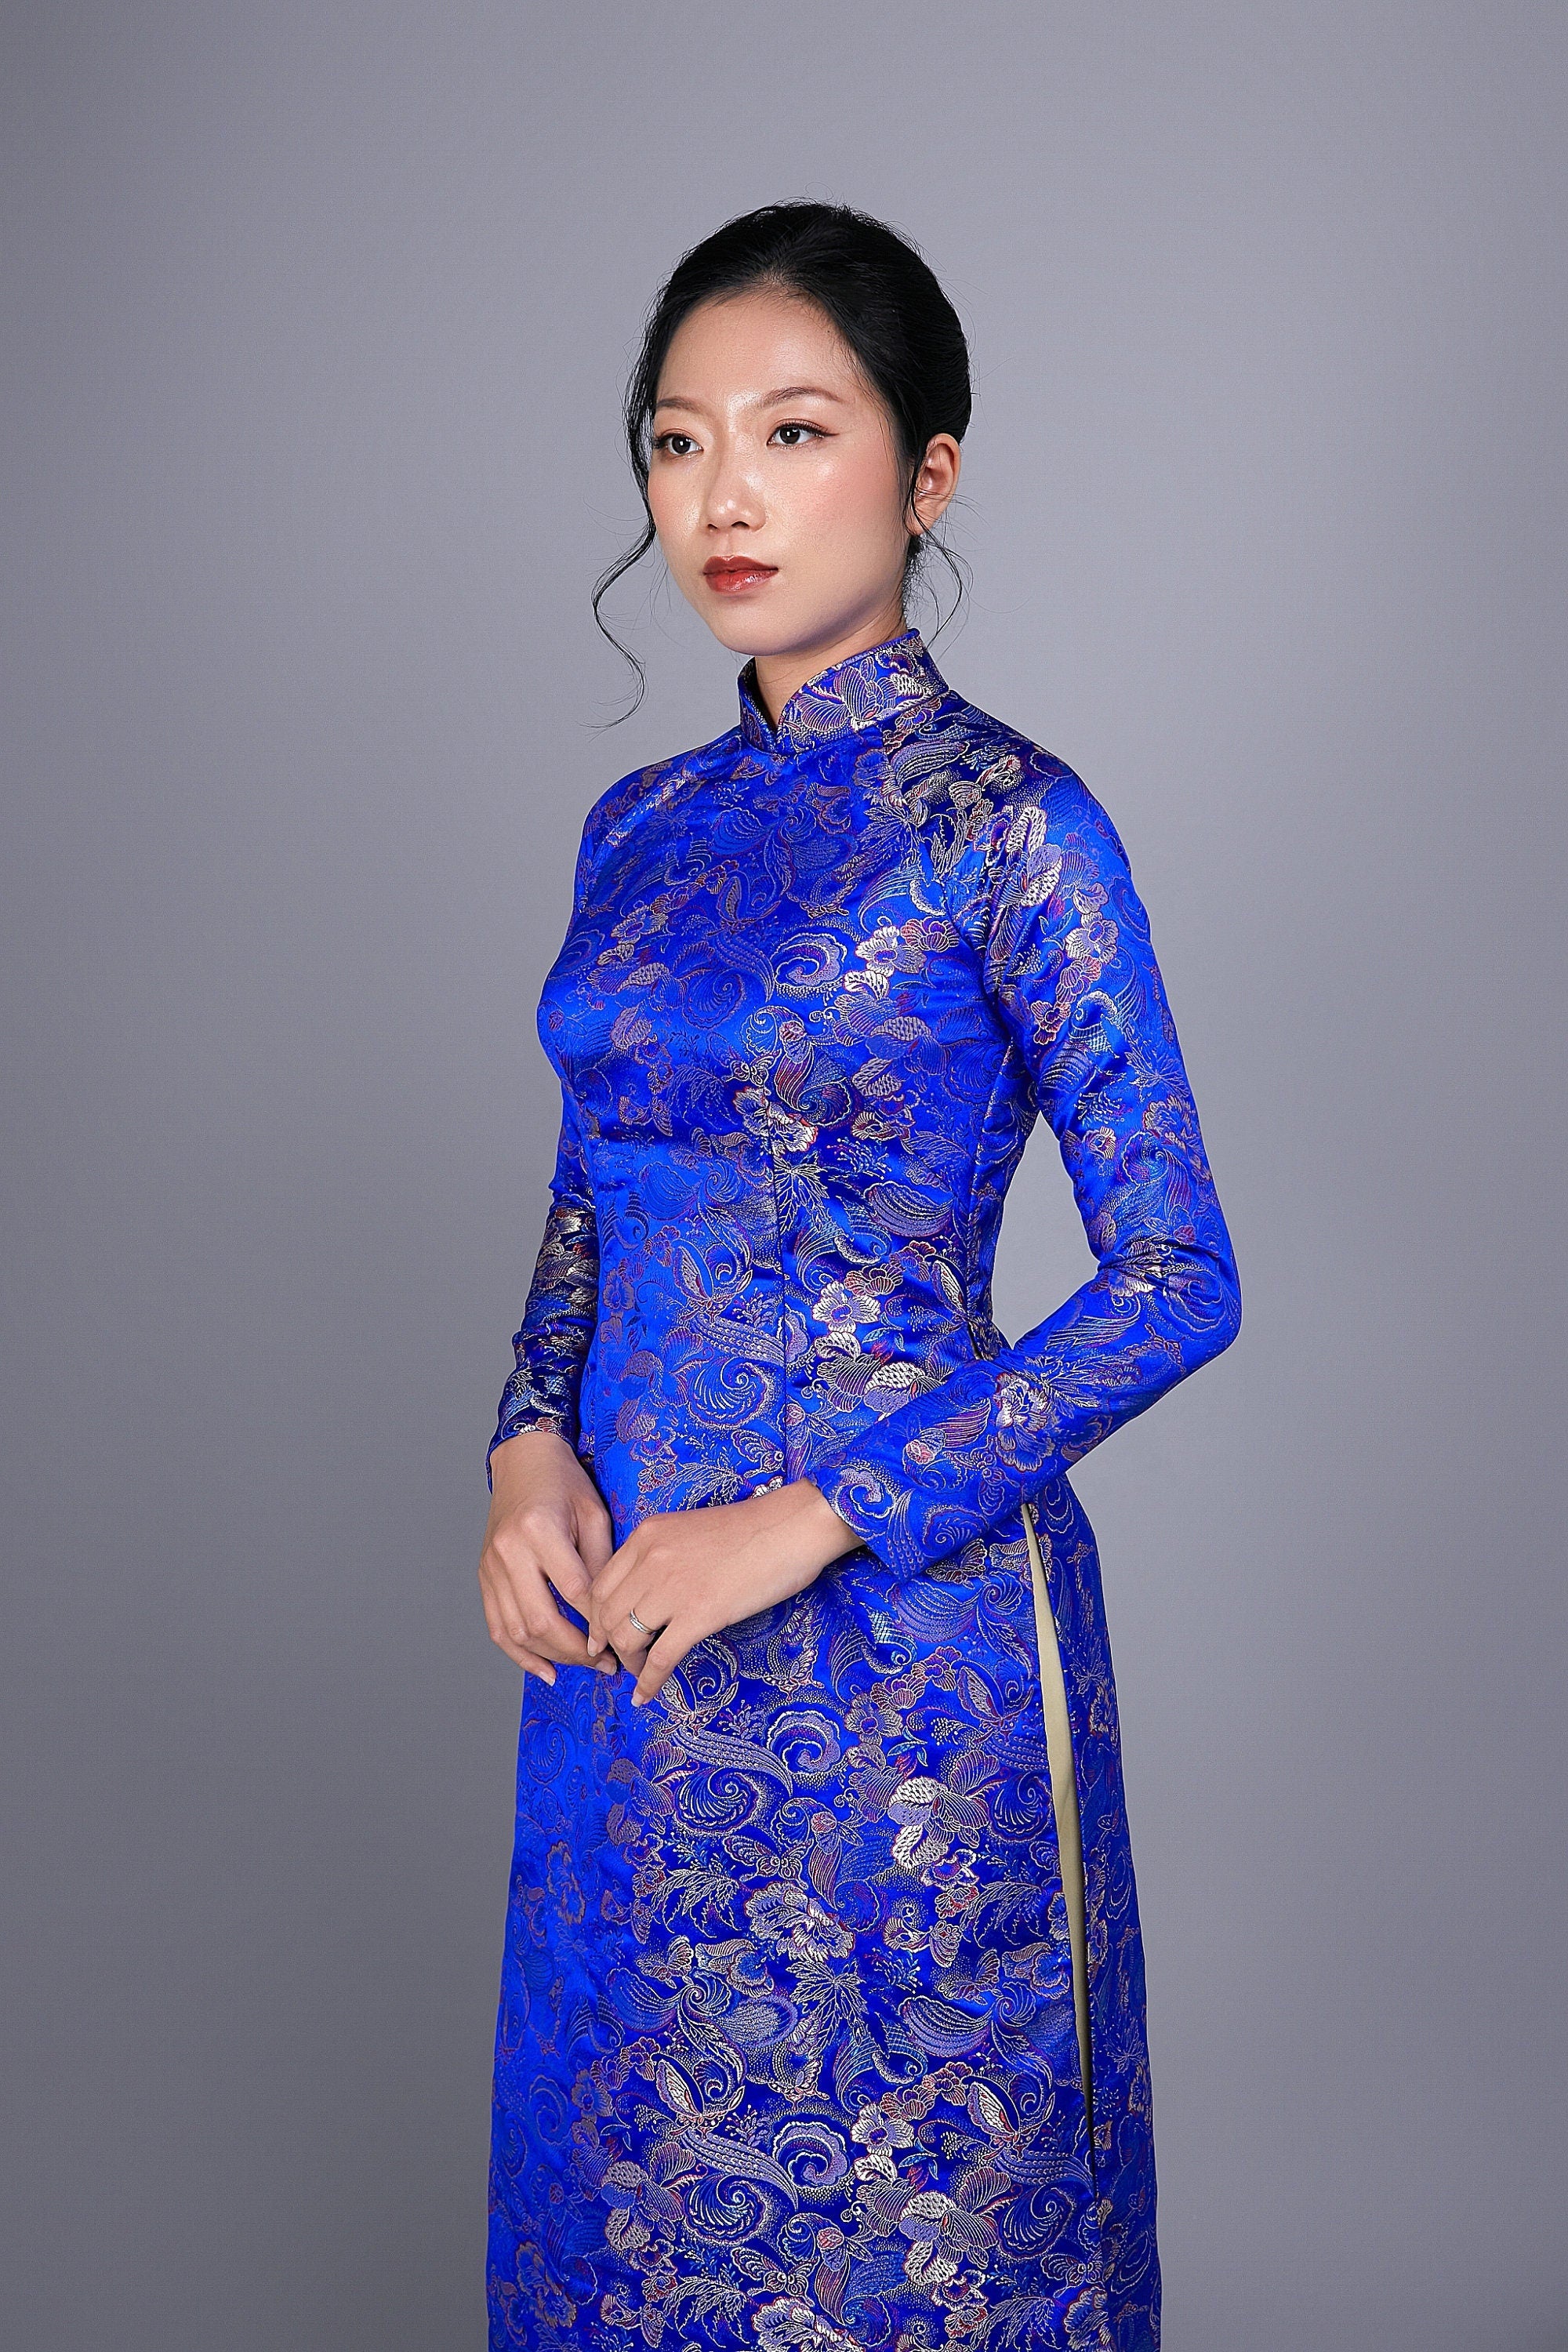 Only Sample ~ US size 4 - Custom made Vietnamese ao dai dress in blue brocade fabric; butterfly and flower motif.